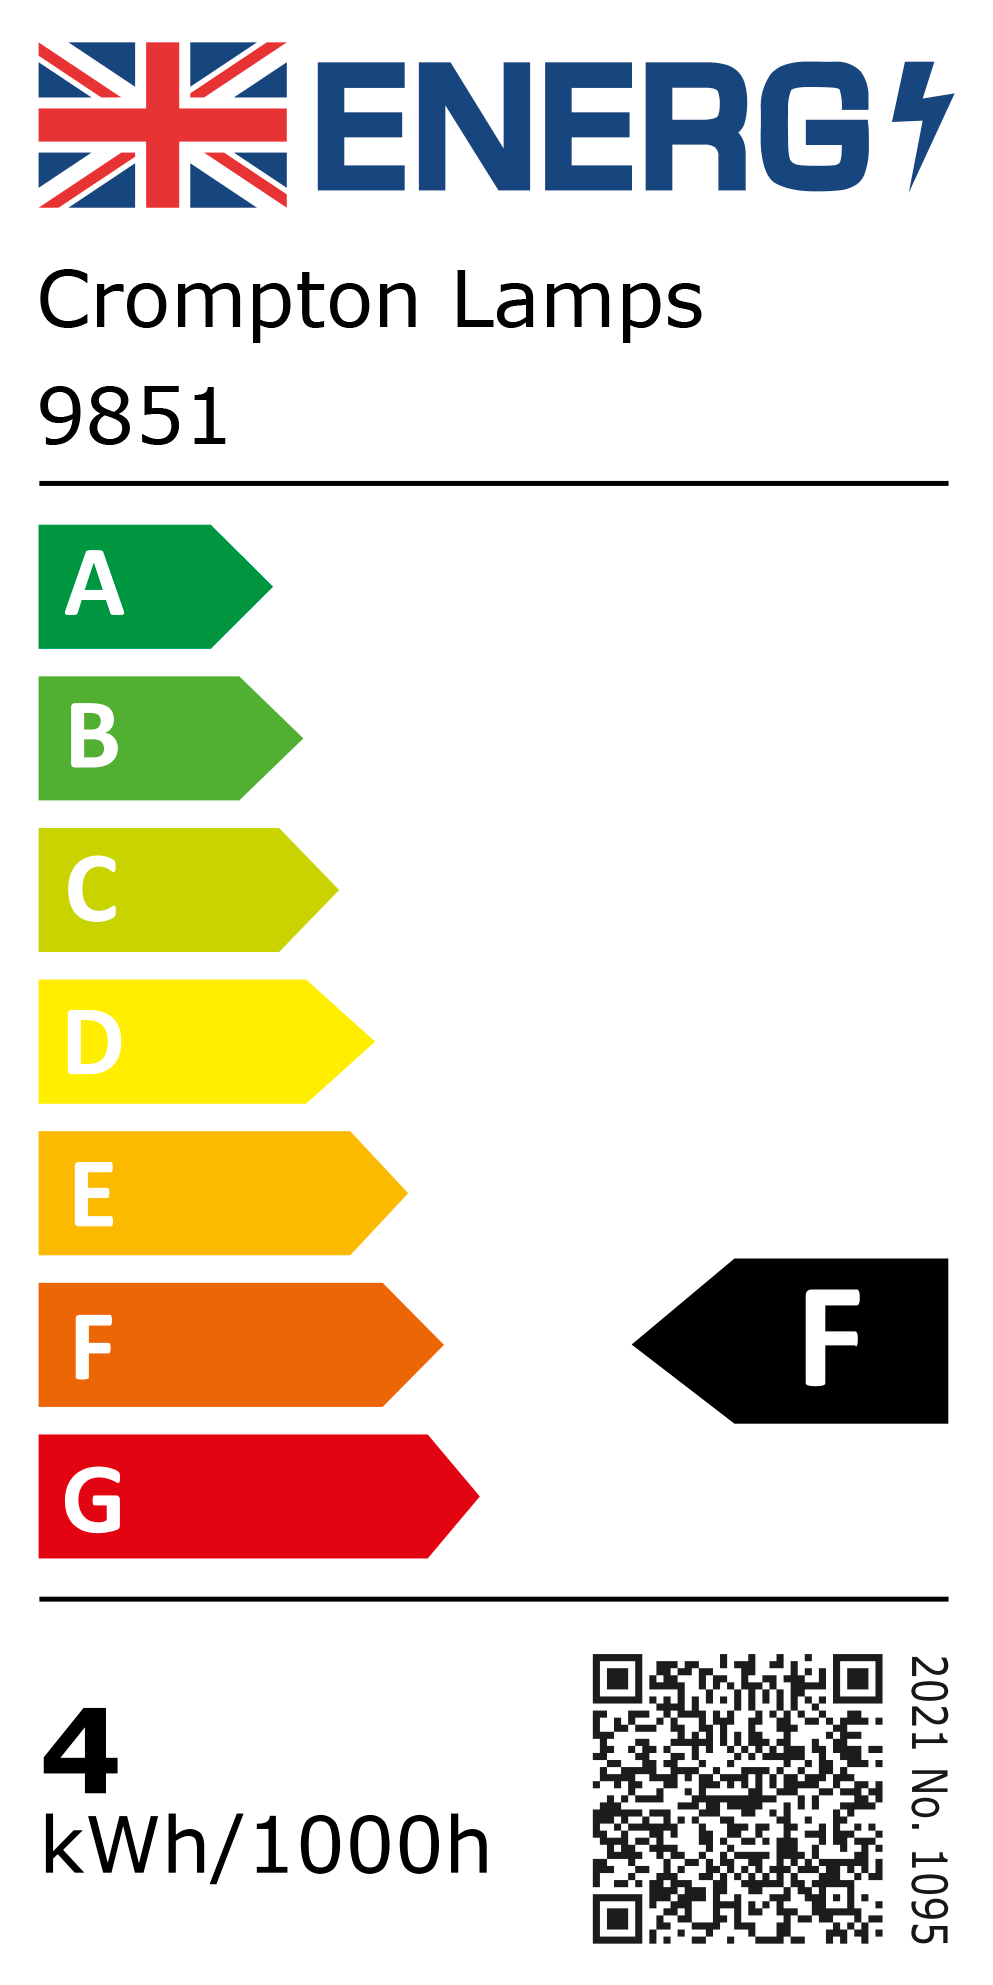 New 2021 Energy Rating Label: Stock Code 9851